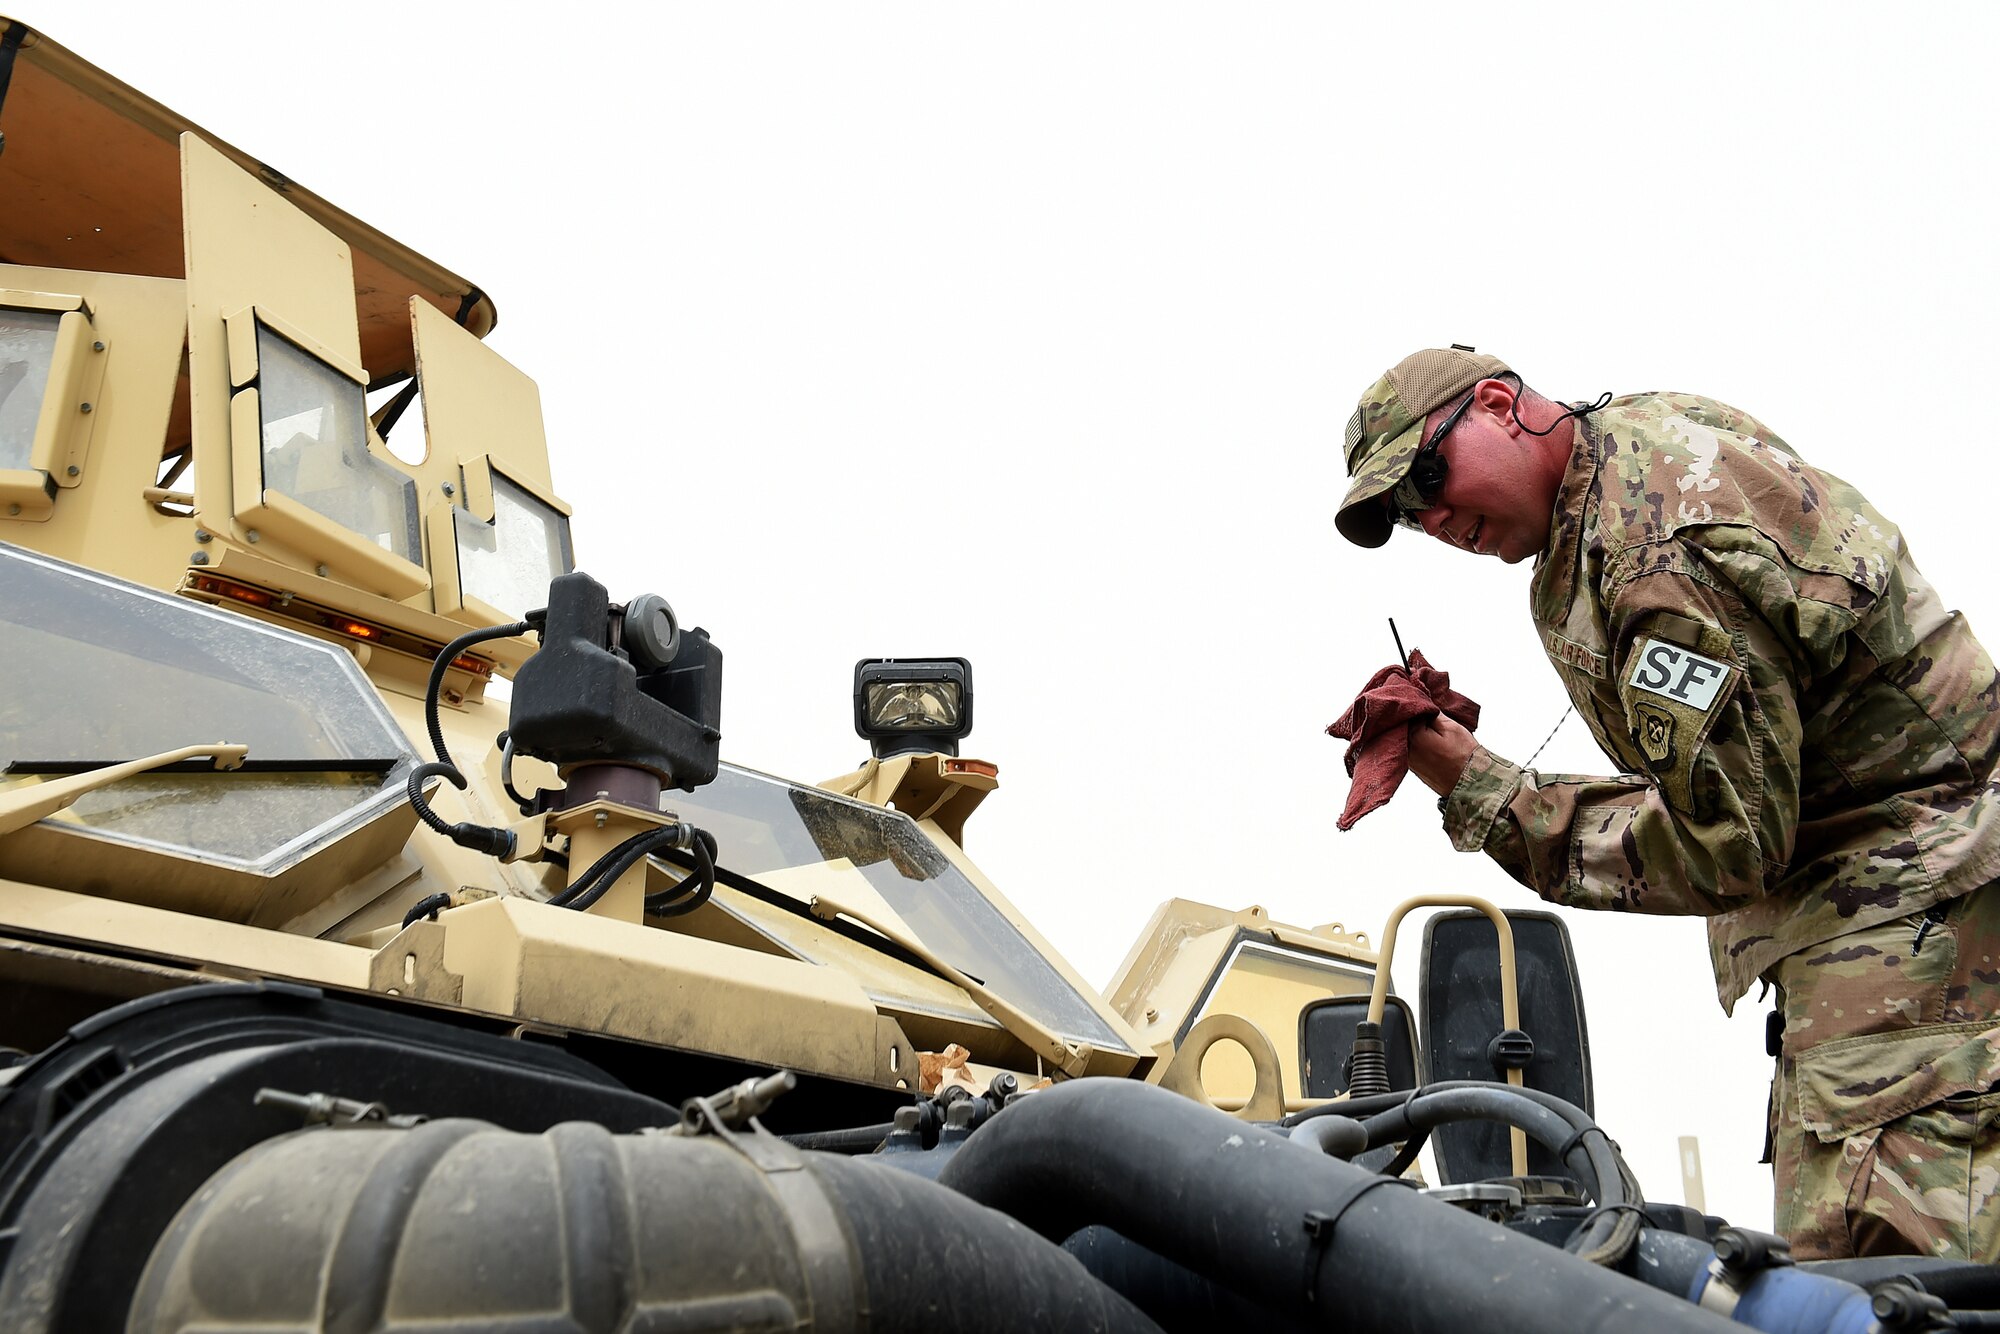 Staff Sgt. Nathan Wolf, 407th Expeditionary Security Forces Squadron craftsman, checks the oil level on a Mine Resistant Ambush Protected All-Terrain Vehicle.